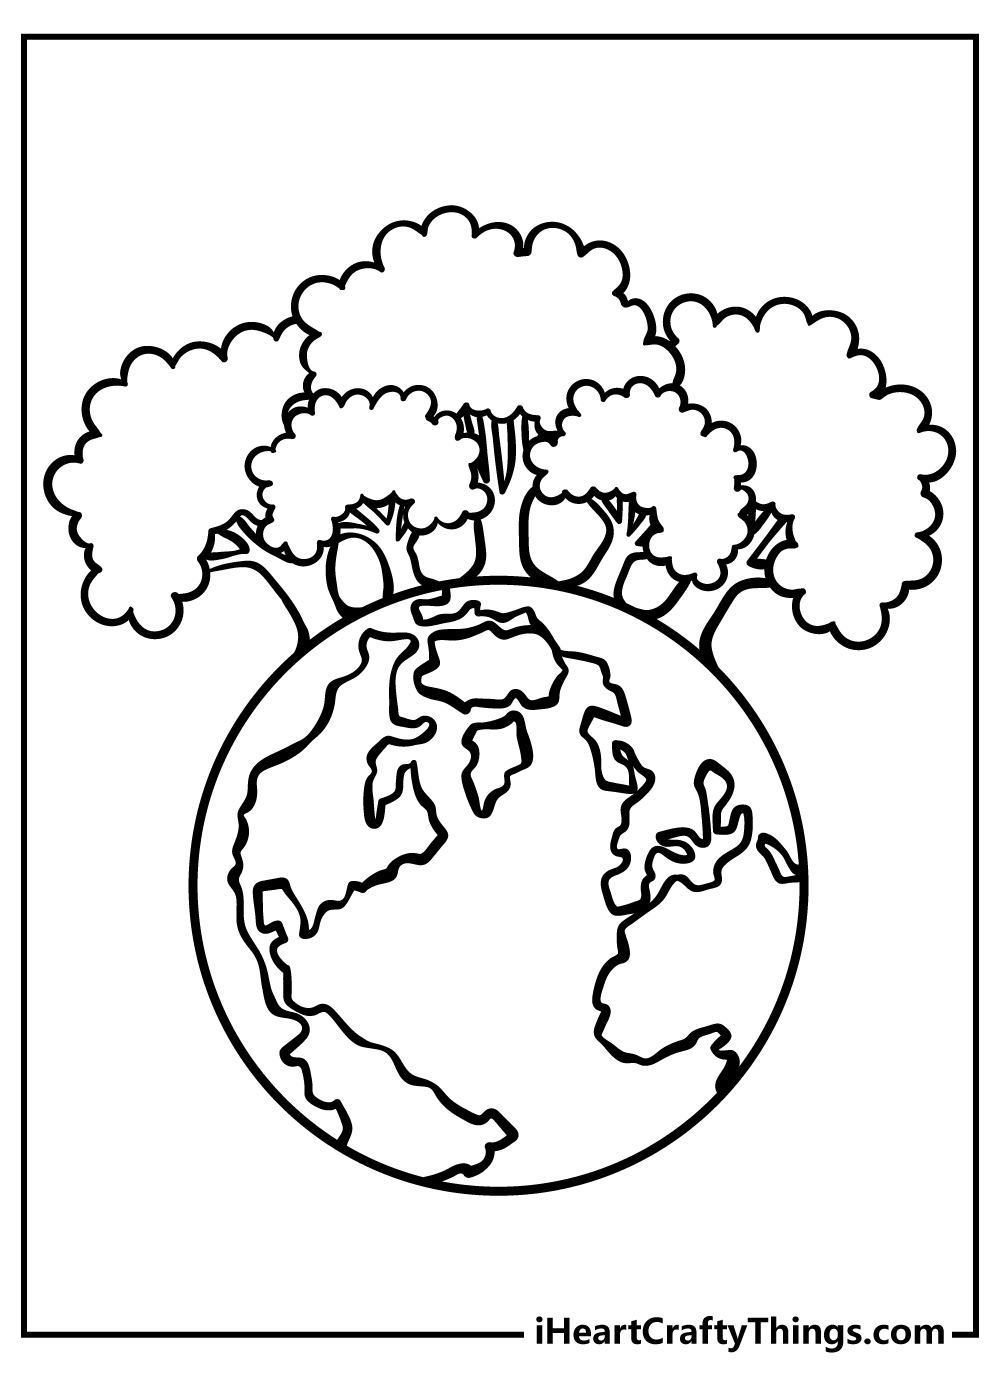 Earth coloring pages free printables